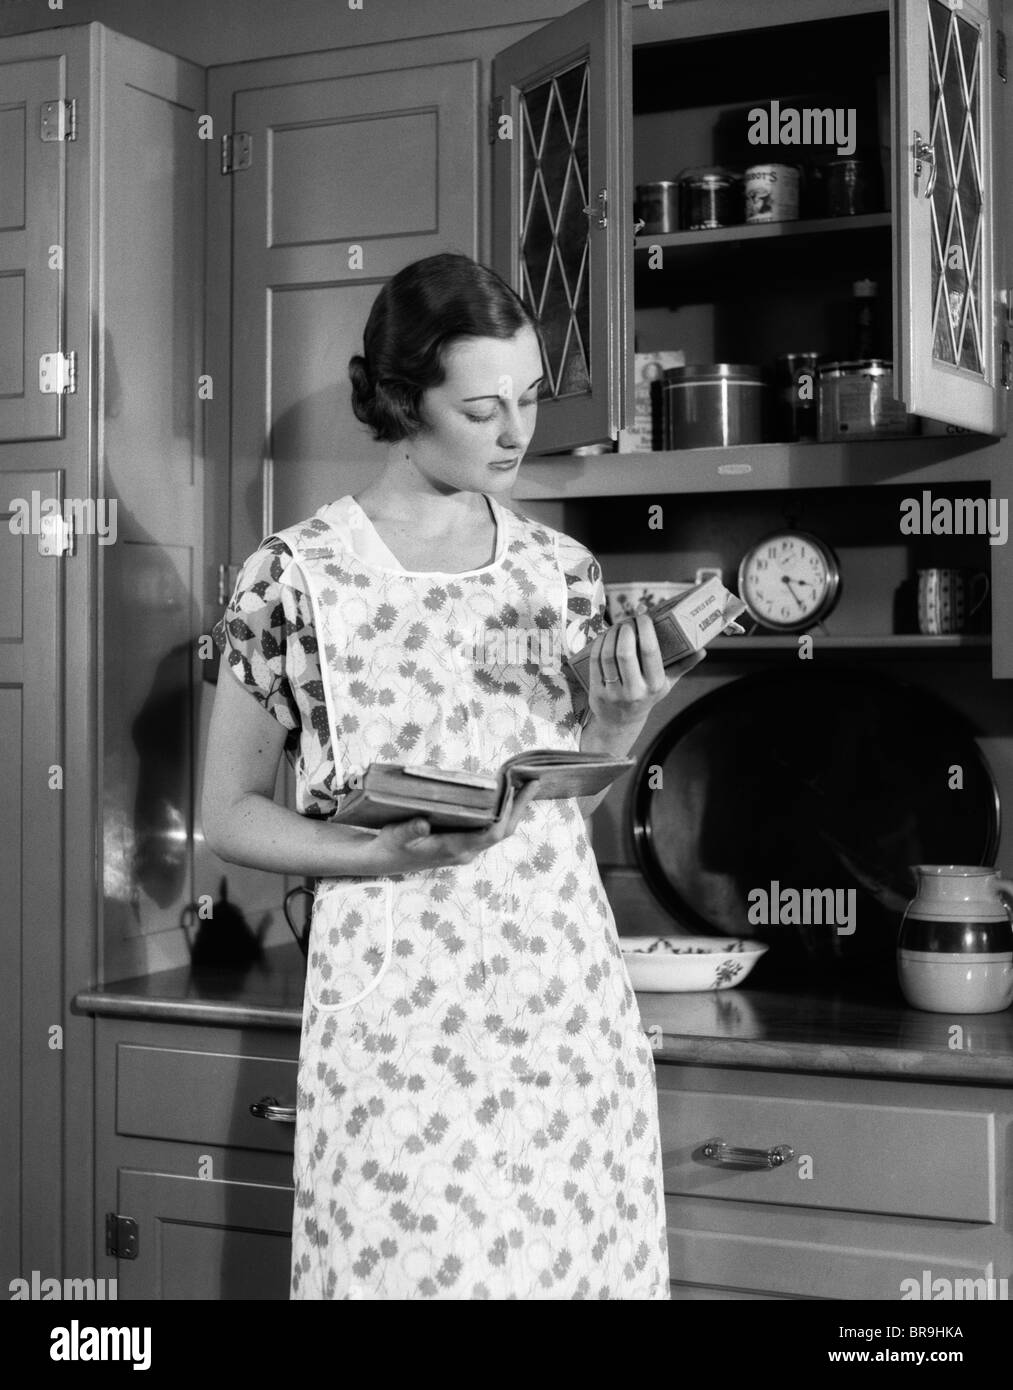 1920s 1930s WOMAN HOUSEWIFE WEARING APRON IN KITCHEN HOLDING COOKBOOK READING PACKAGE OF CORN STARCH Stock Photo